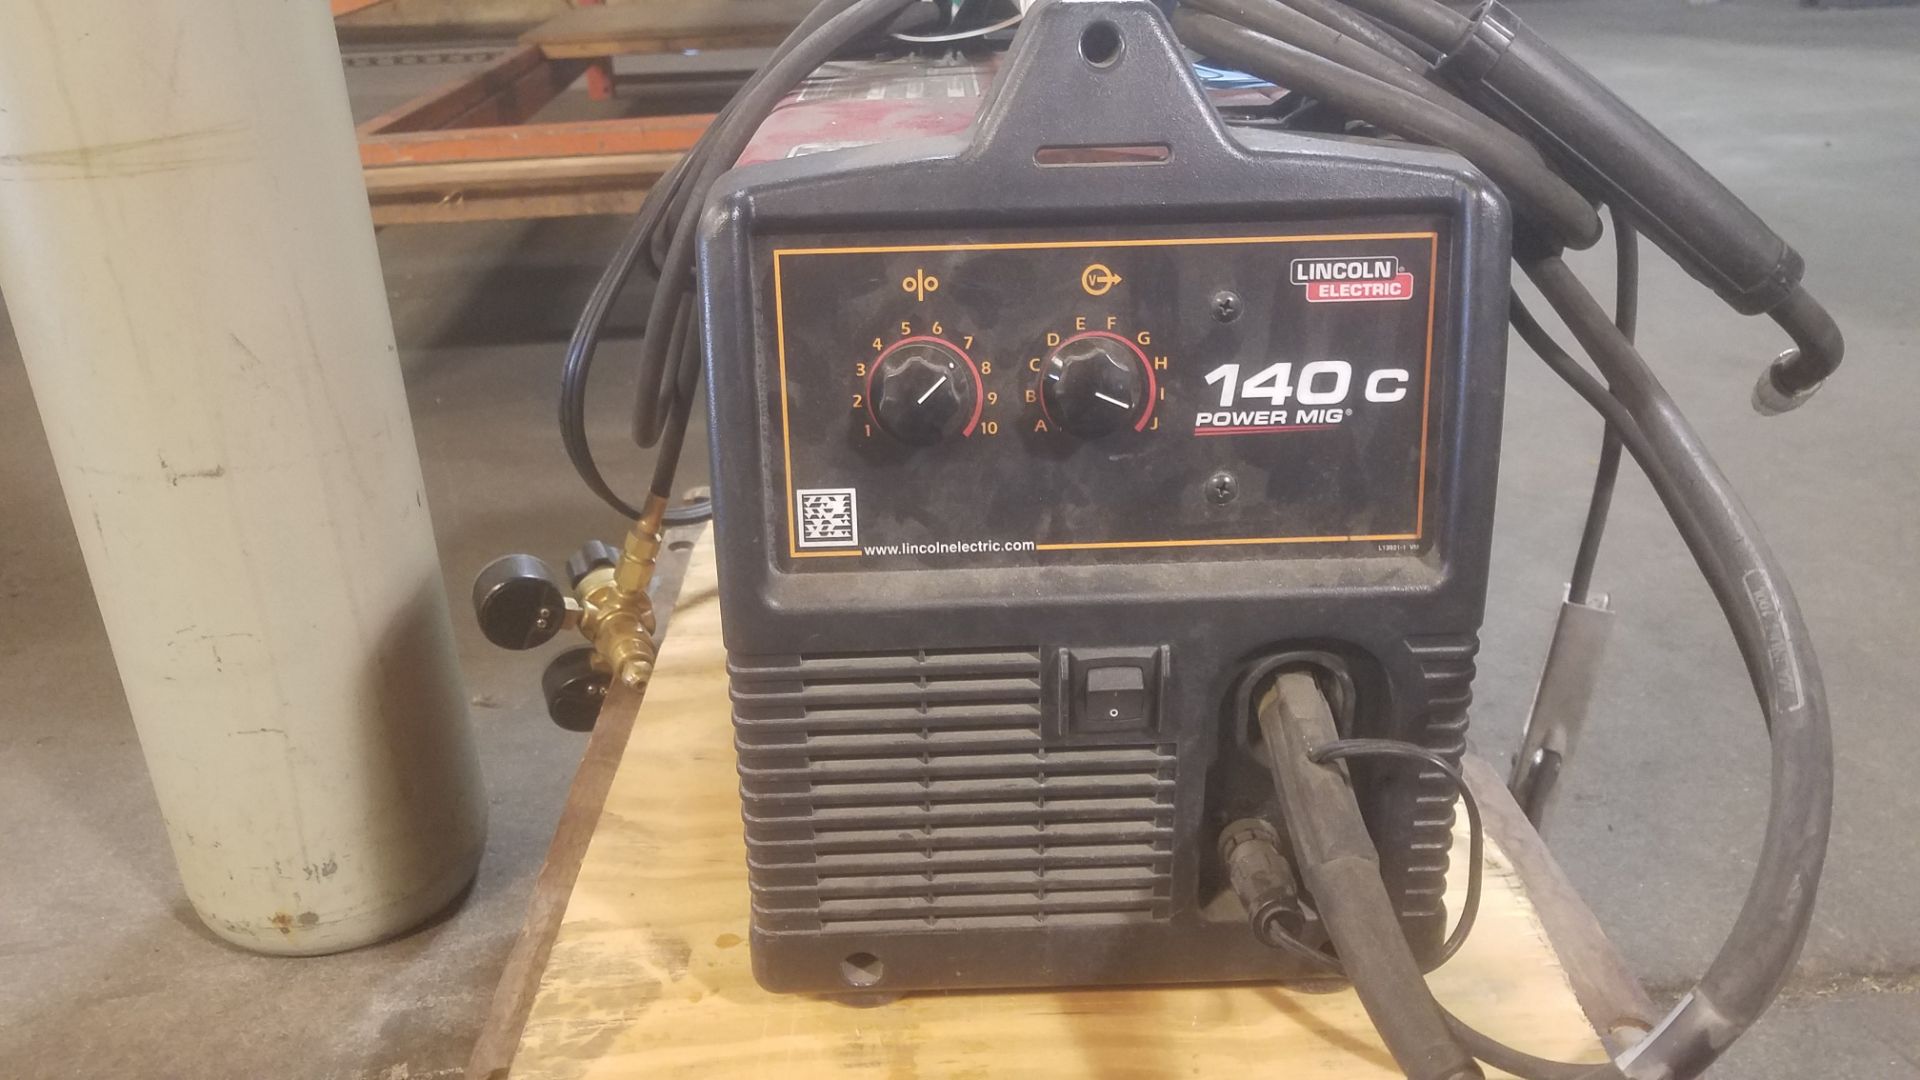 Lincoln 140C Mig Welder Complete with Yellow Tank, 1-PH 120-Volt - Image 2 of 3